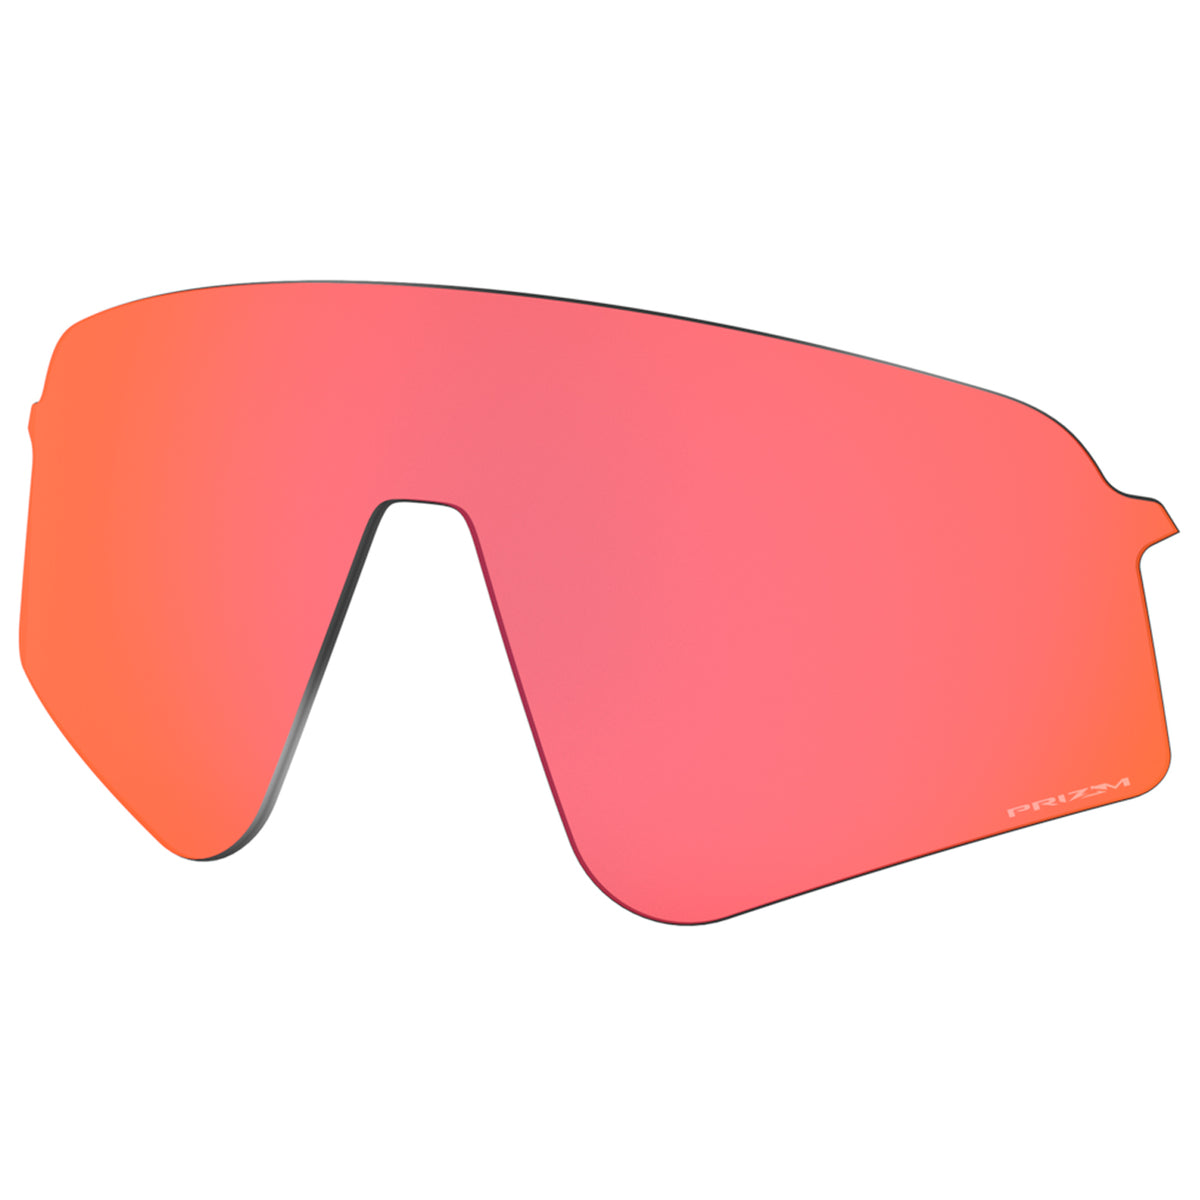 Oakley Sutro Lite Sweep lens - Prizm trail torch | All4cycling